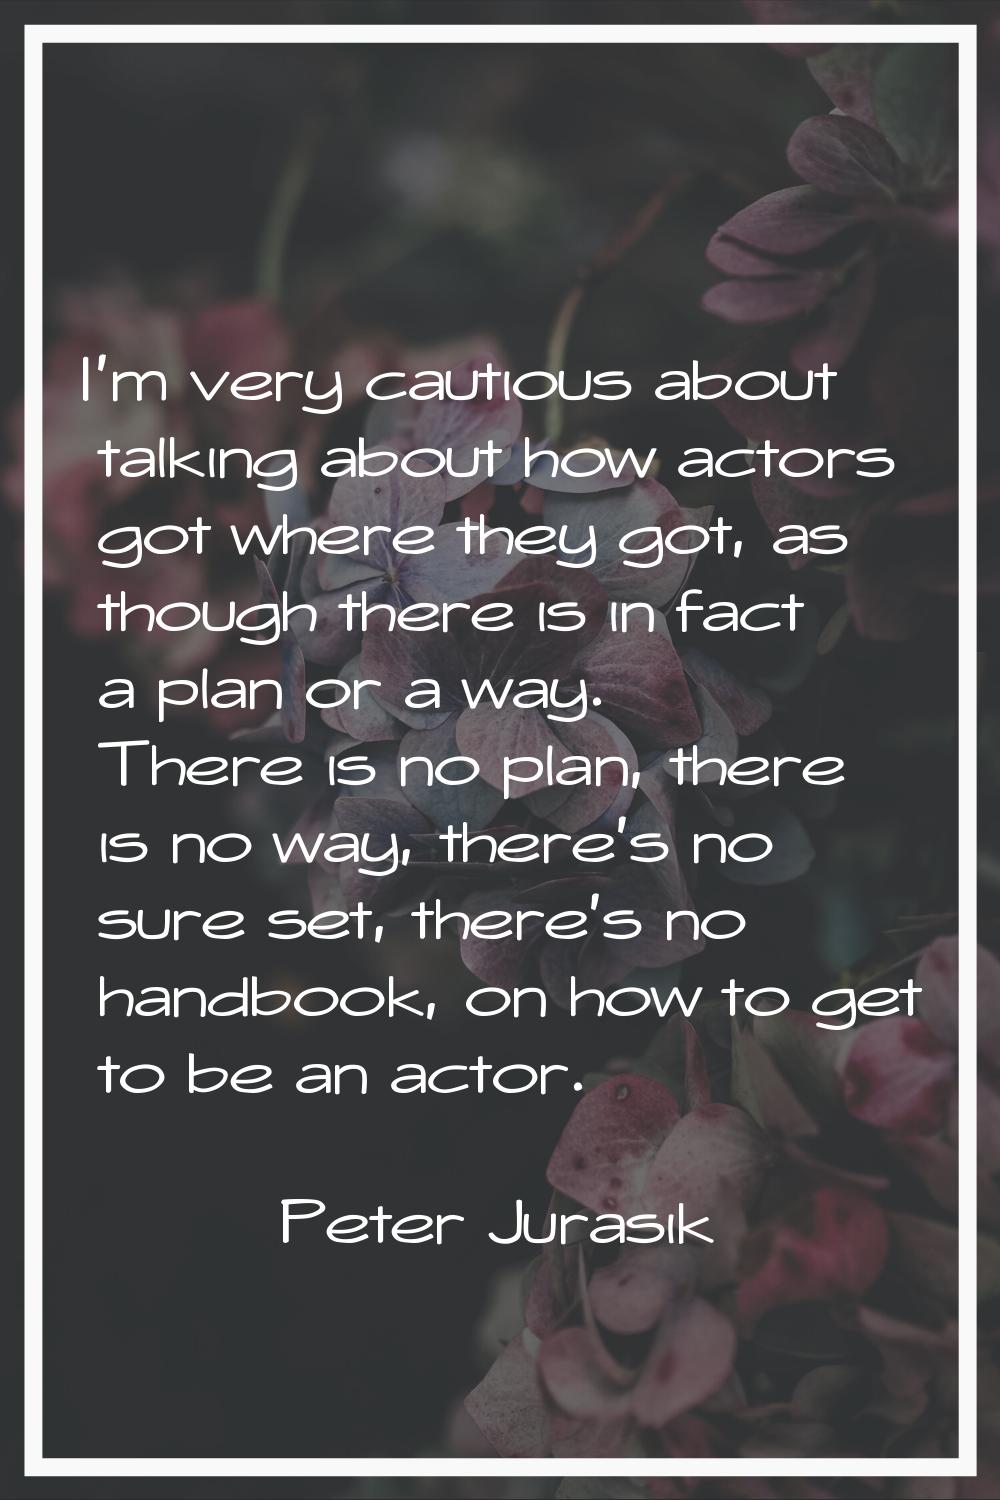 I'm very cautious about talking about how actors got where they got, as though there is in fact a p